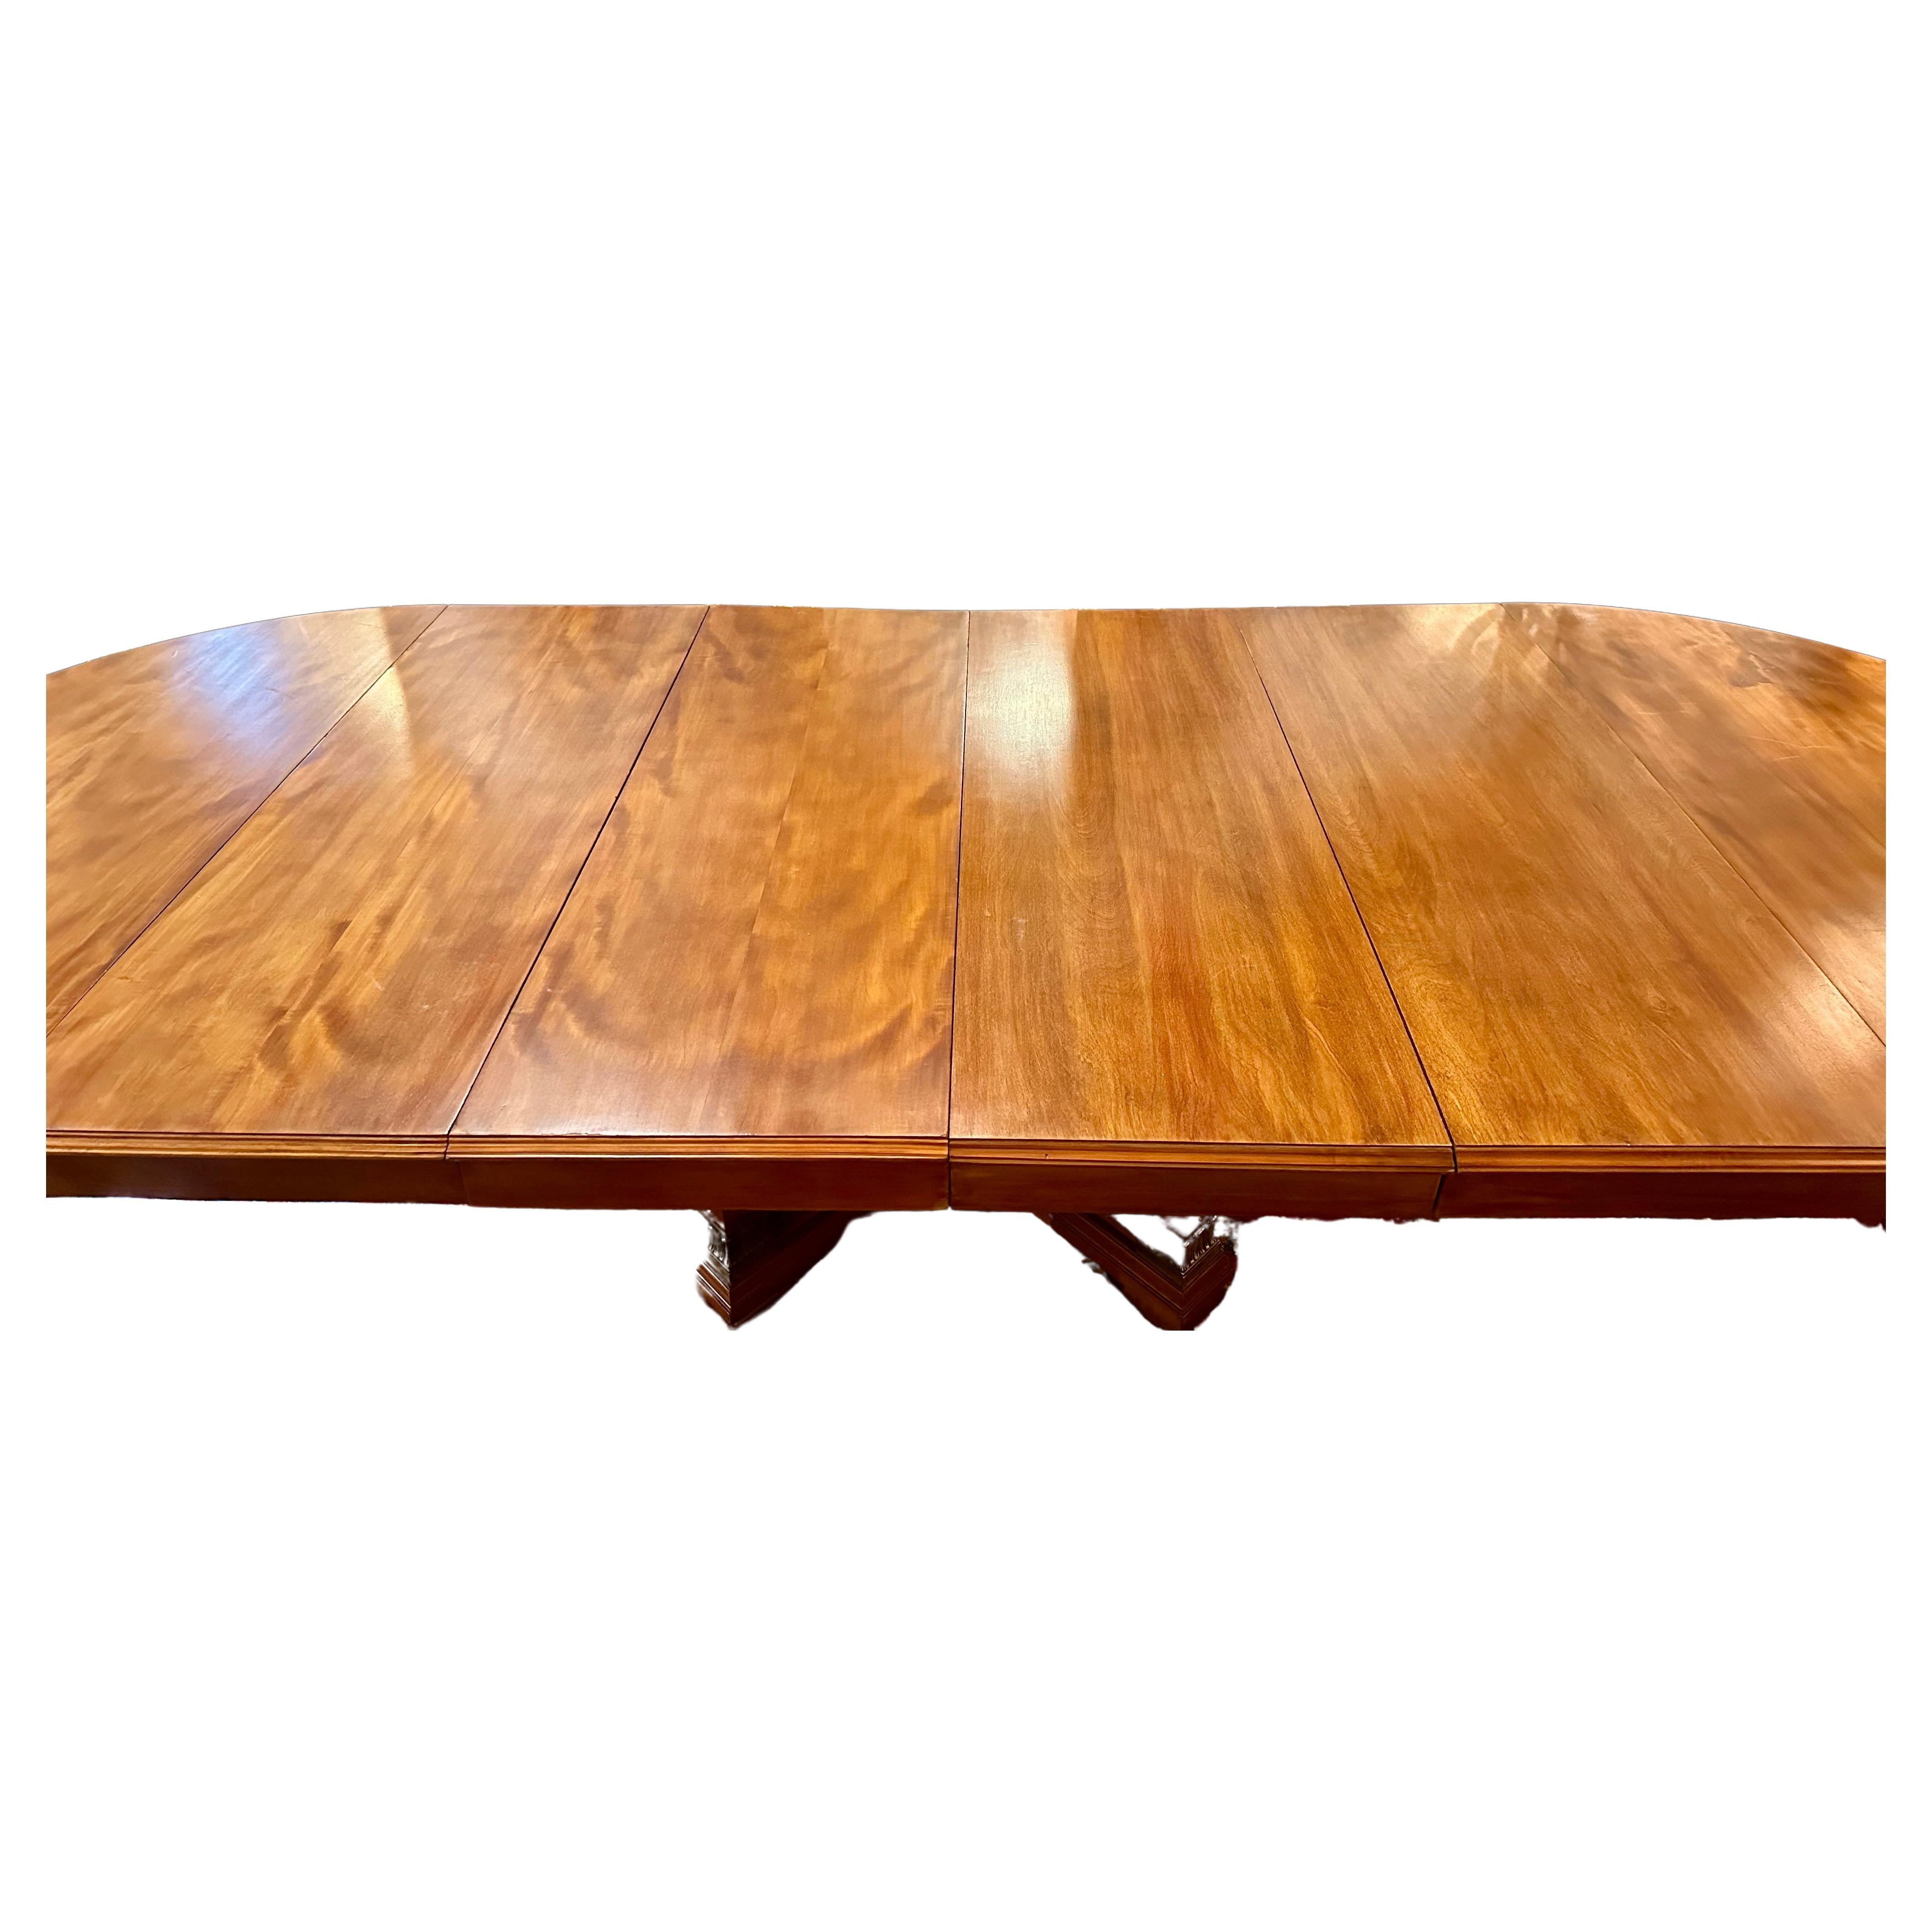 19th Century Antique French Empire Bronze D' Ore Mounted Mahogany Dining Table, Circa 1890. For Sale